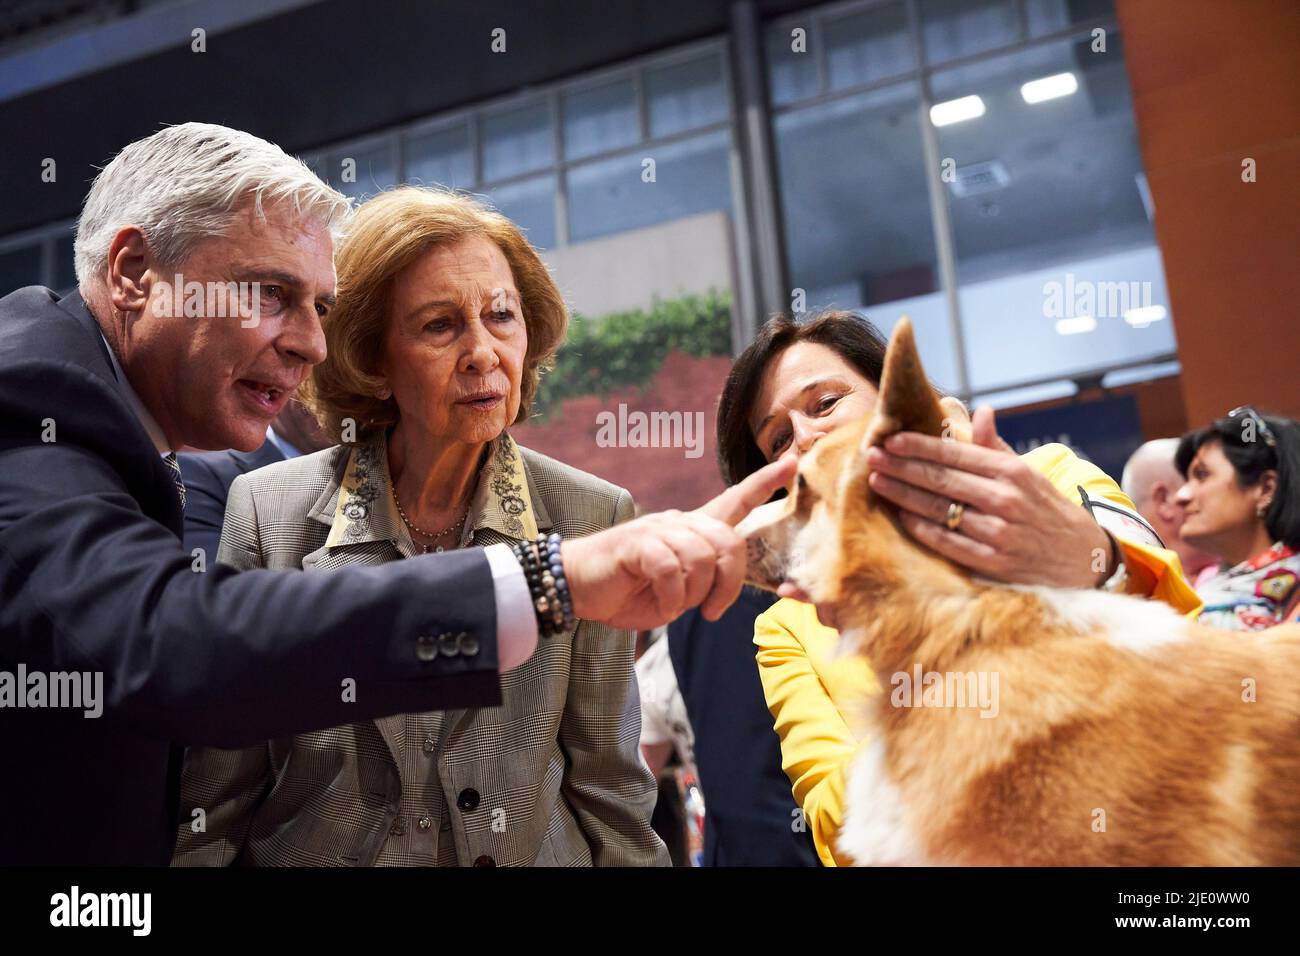 Madrid. Spain. 20220624,  The former Queen Sofia attends  the opening of the World Dog Show trade fair at IFEMA on June 24, 2022 in Madrid, Spain   In the pic, The former Queen Sofia caresses and takes interest in Pembroke Welsh Corgi the same breed of the dogs of Queen Elizabeth II of the United Kingdom of Great Britain and Northern Ireland Stock Photo